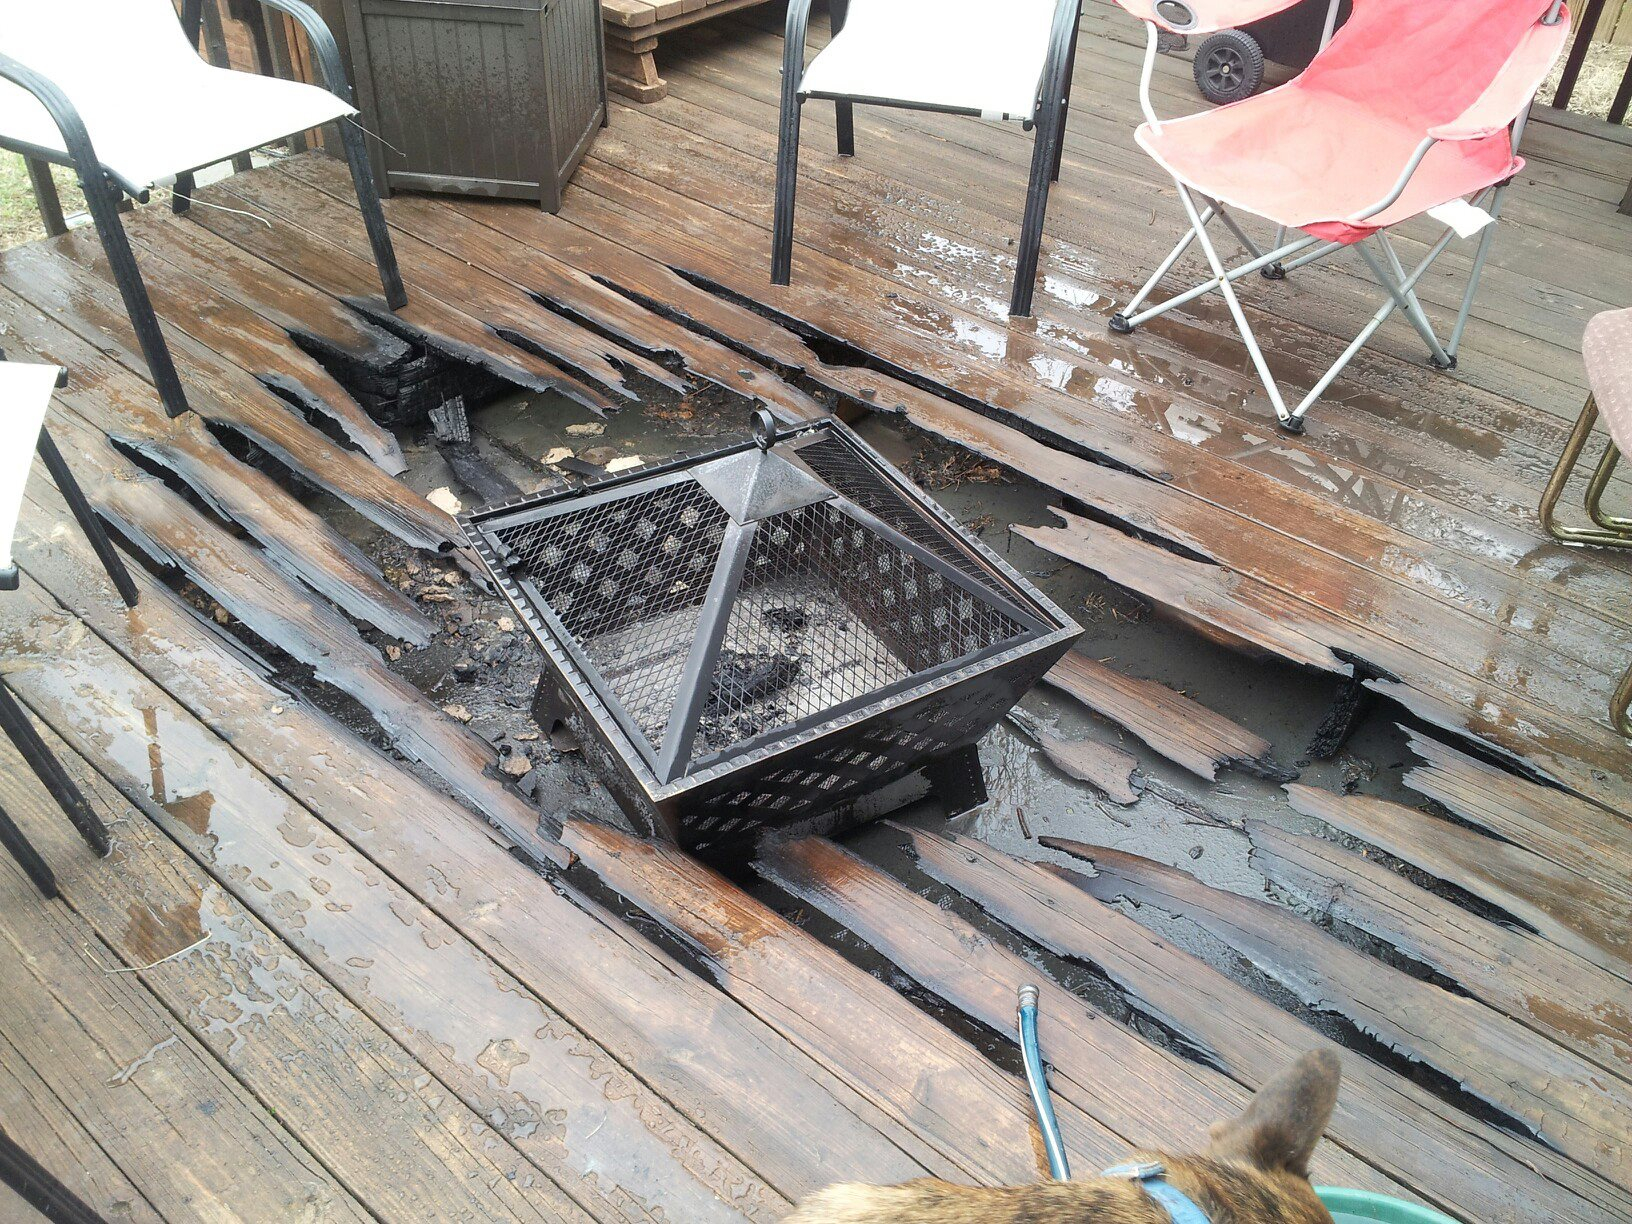 Ill Just Put This Fire Pit On A Wooden Floor Wcgw X Post From R intended for proportions 1632 X 1224